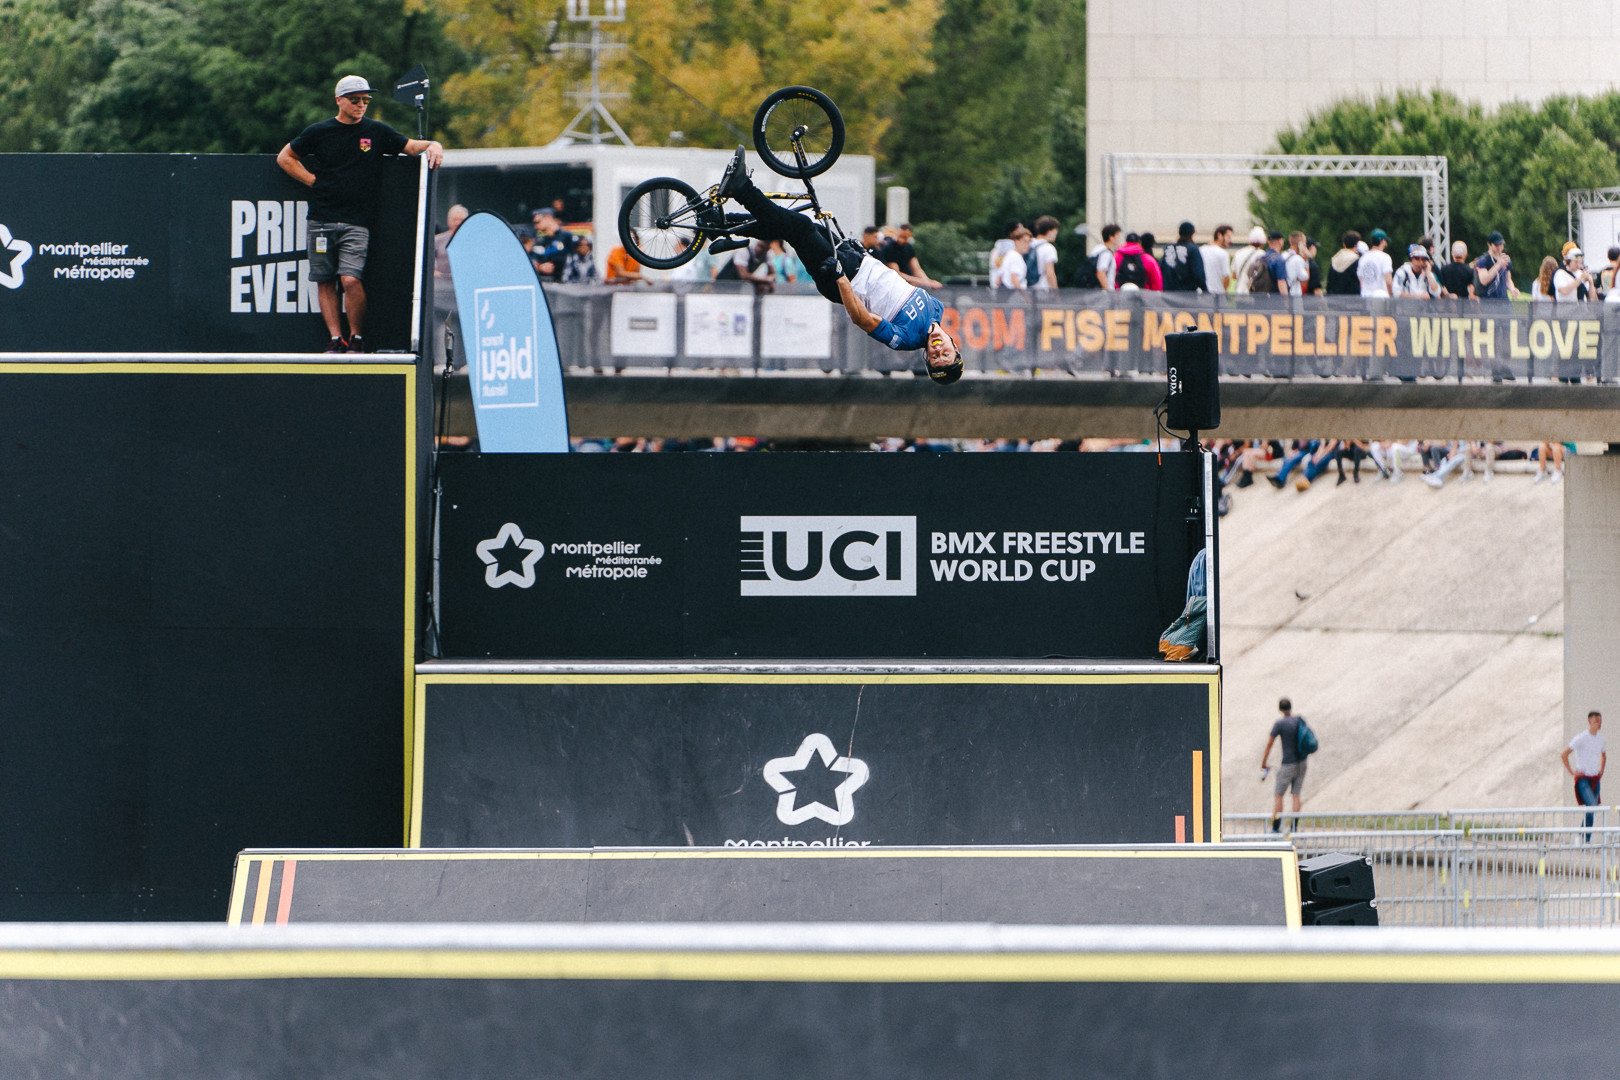 The United States' national champion Christopher Marcus made up the podium with a bronze medal-winning 90.00 points ©Hurricane-FISE